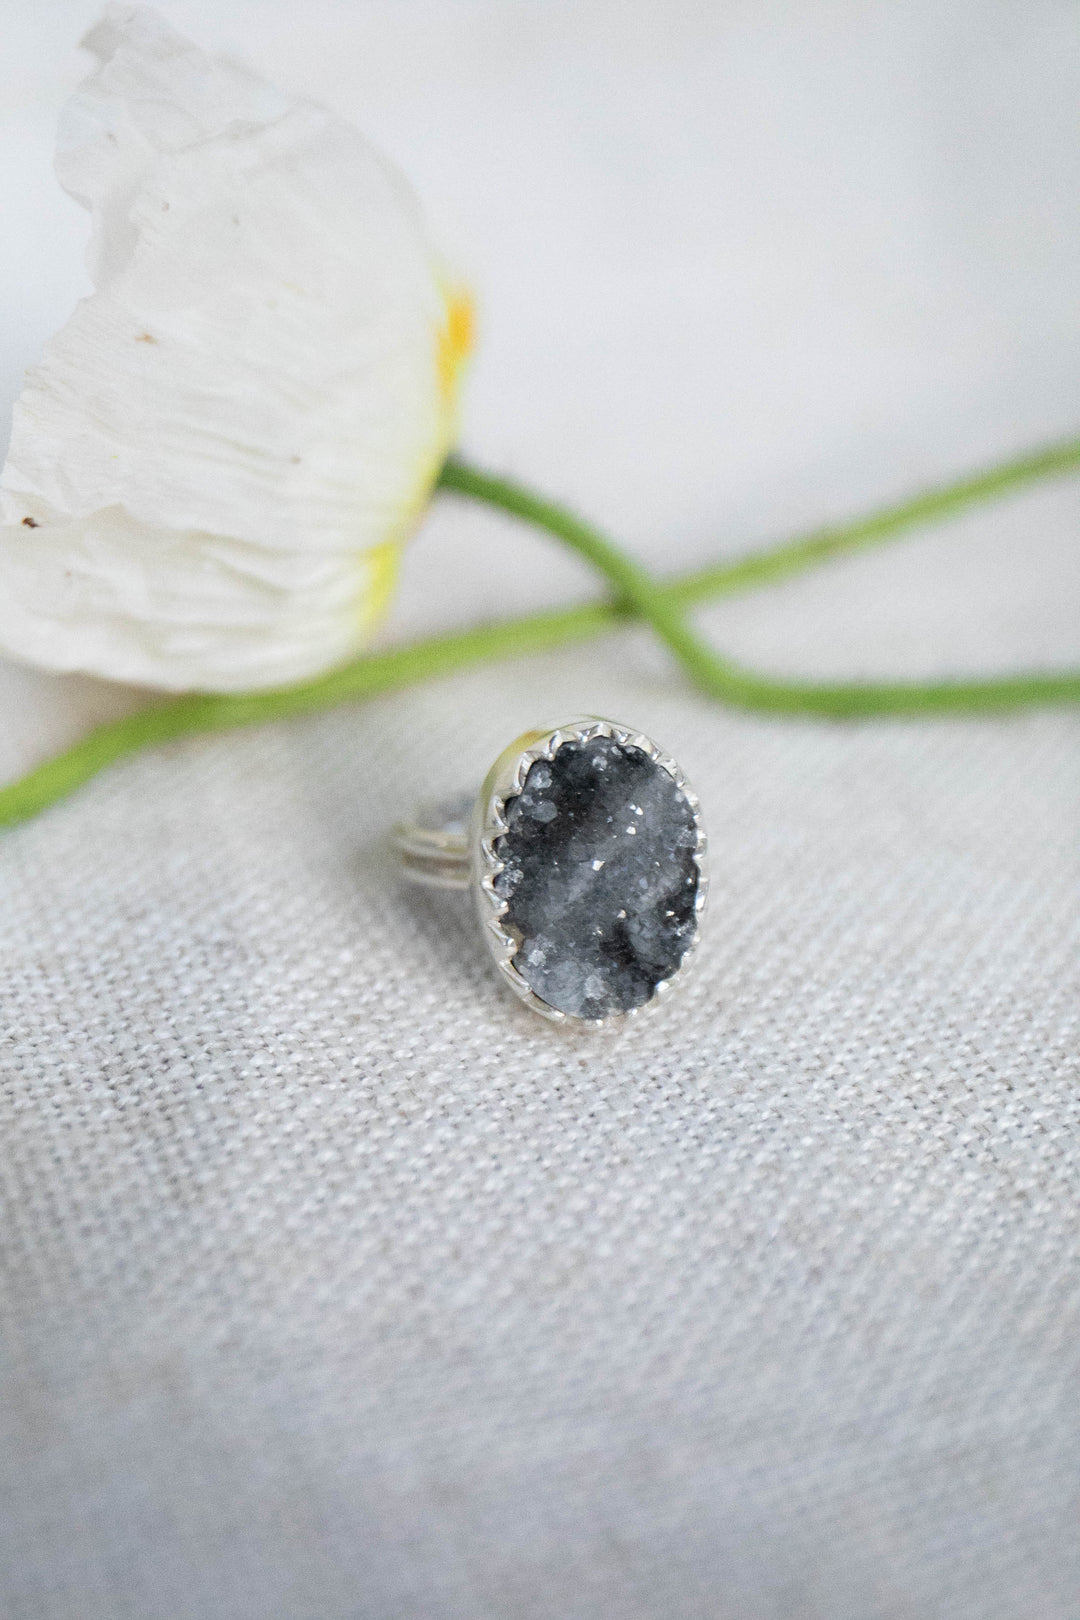 Black Druzy Ring in Sterling Silver - Size 7.5 US